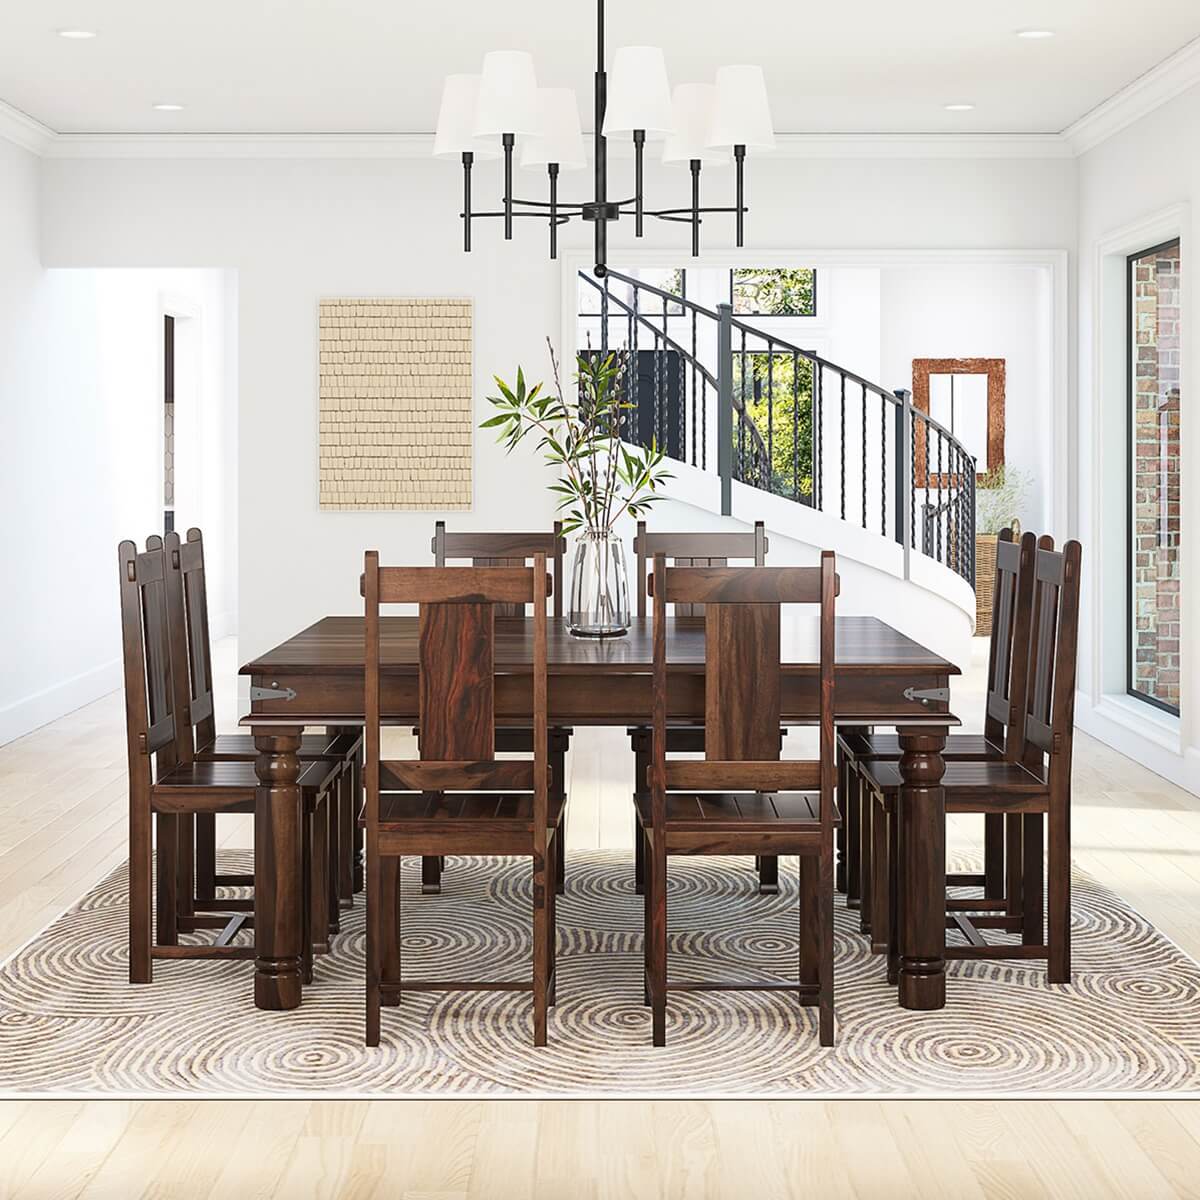 https://www.sierralivingconcepts.com/images/thumbs/0391472_richmond-rustic-solid-wood-square-dining-table-chair-set-for-8-people.jpeg